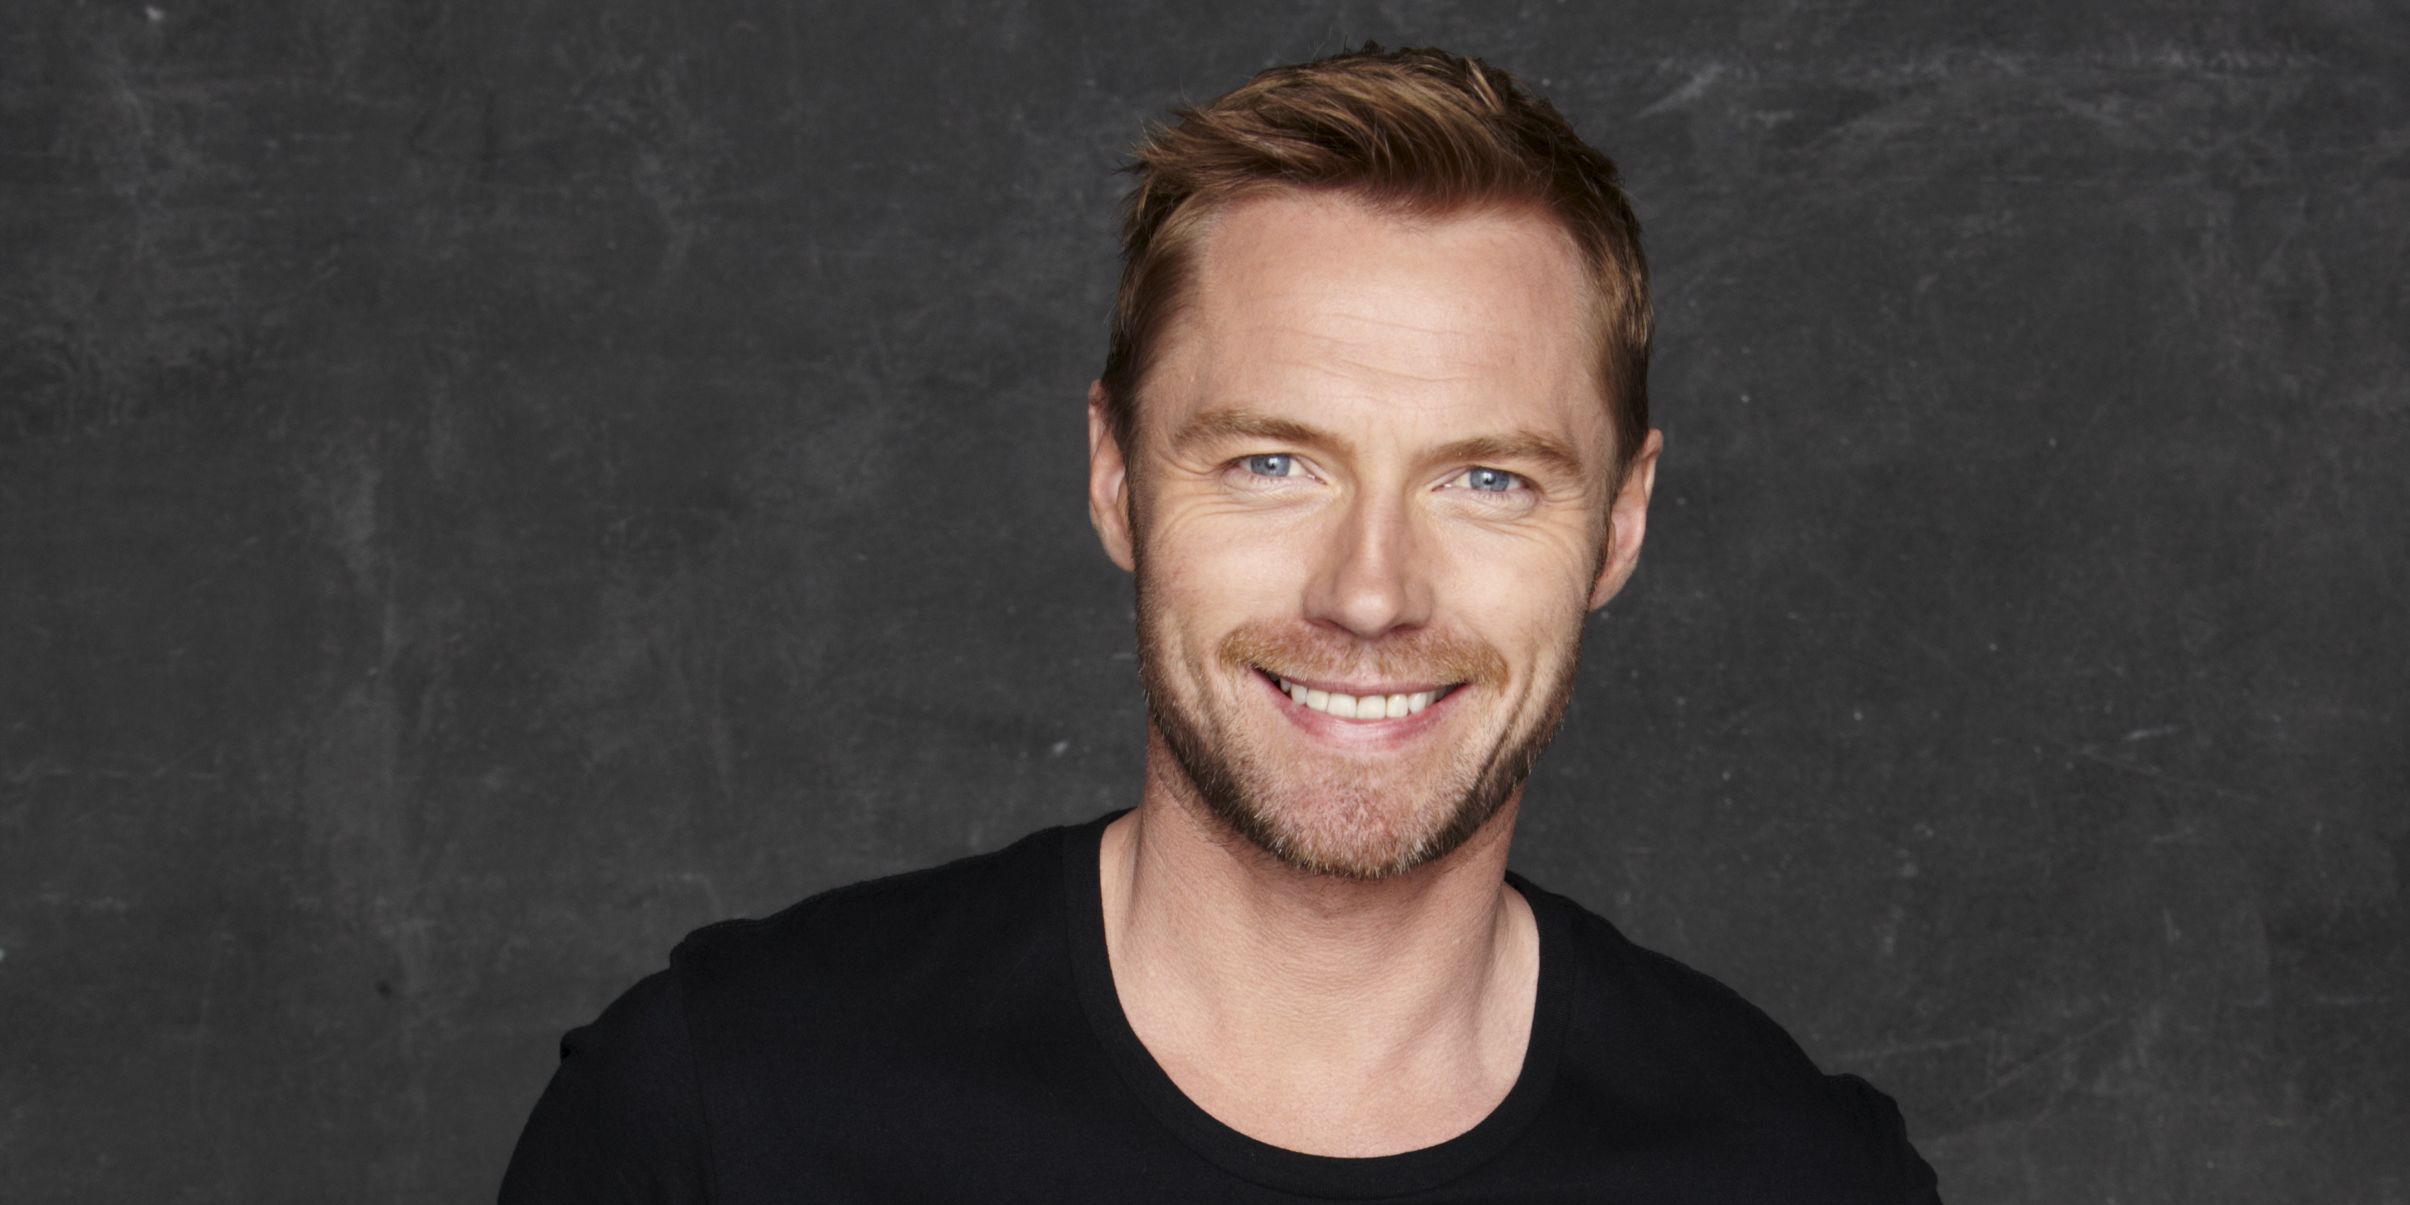 Pop heart-throb Ronan Keating recalls the ’90s and shares his love of Melbourne ahead of Boyzone's first concert tour